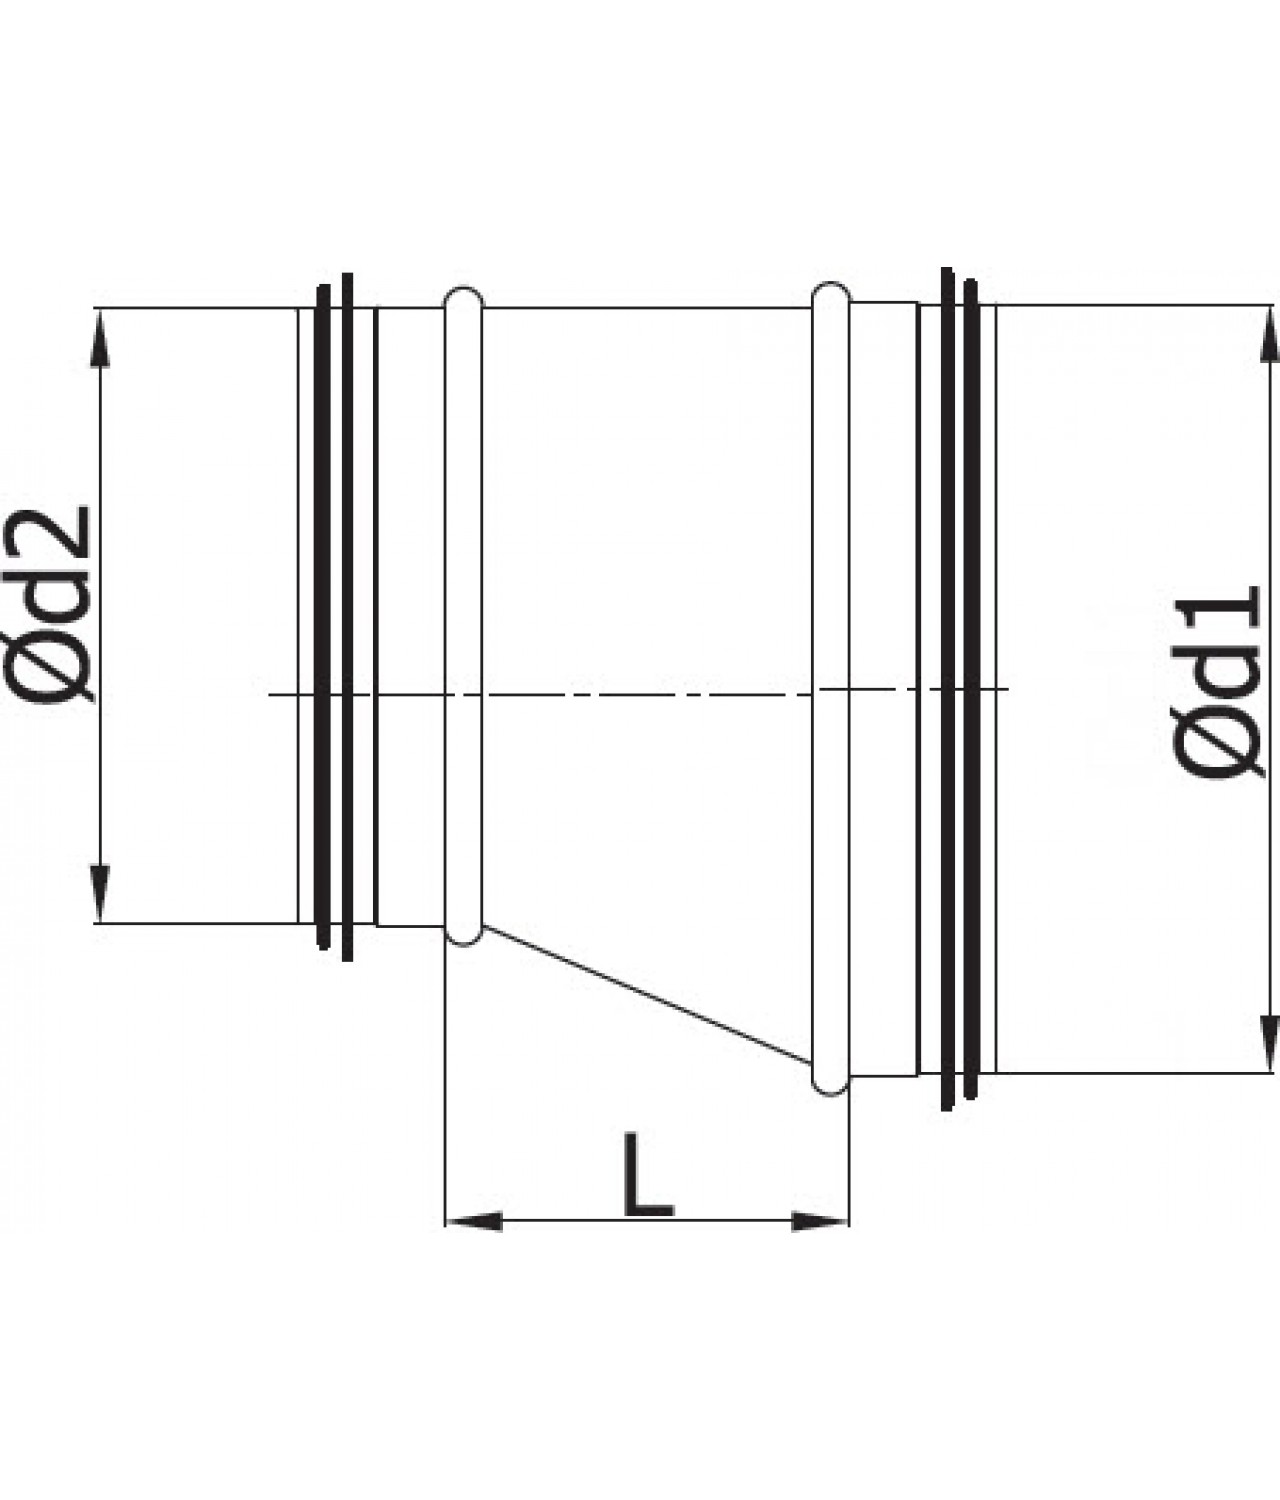 Asymmetric reducers for ducts ARG - drawing